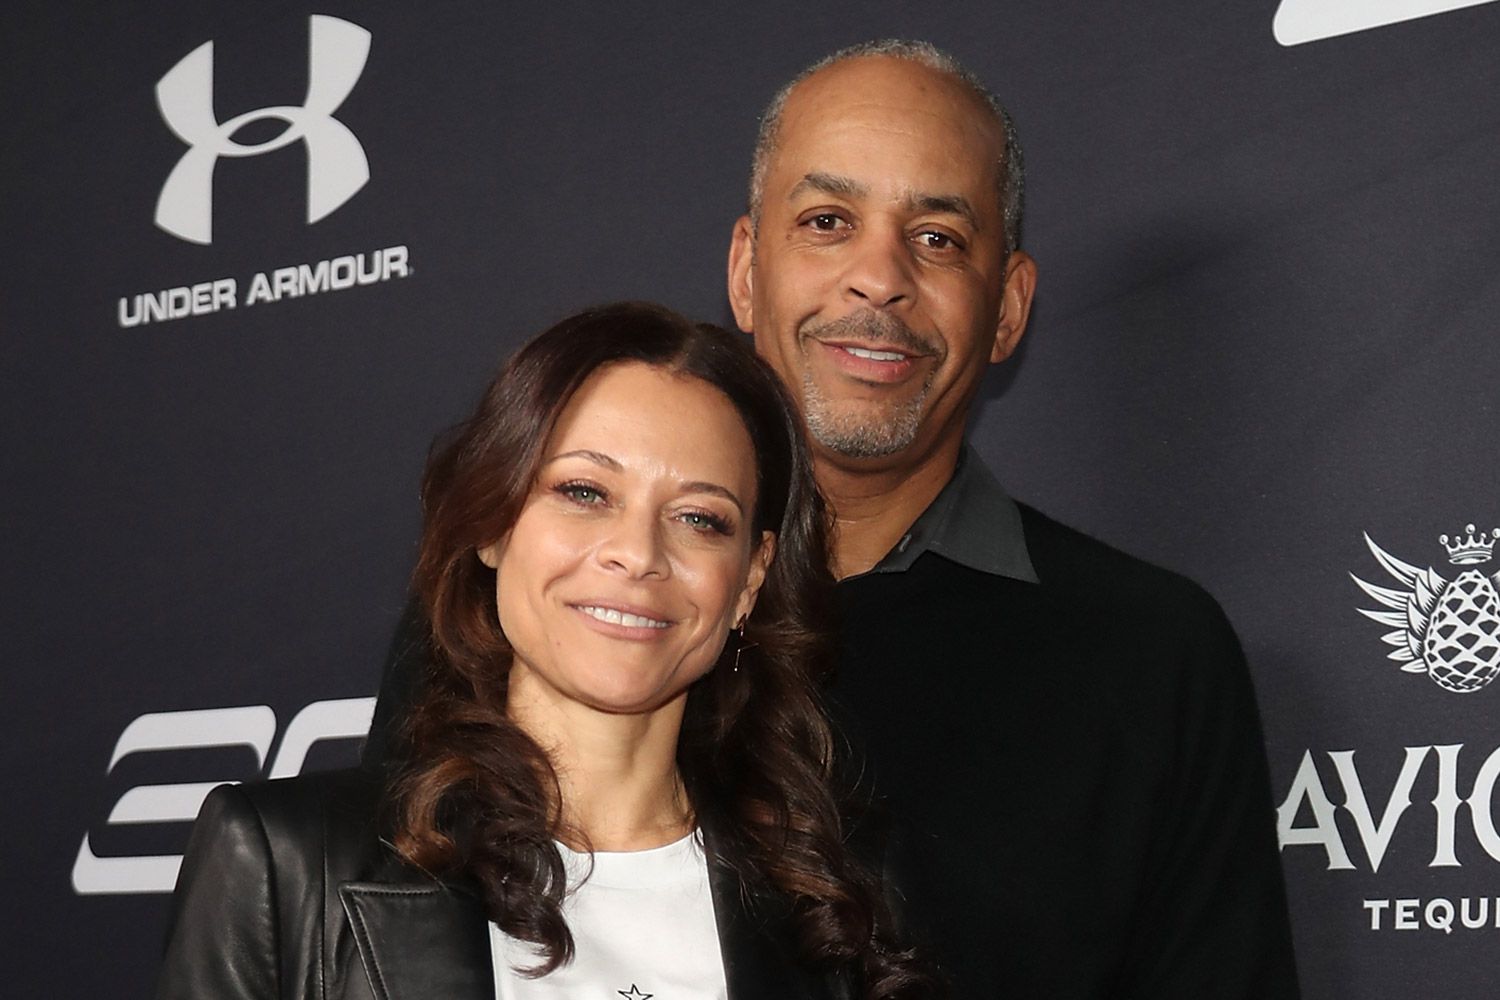 Shocking News: Dell And Sonya Curry's Divorce Announcement Sends Shockwaves